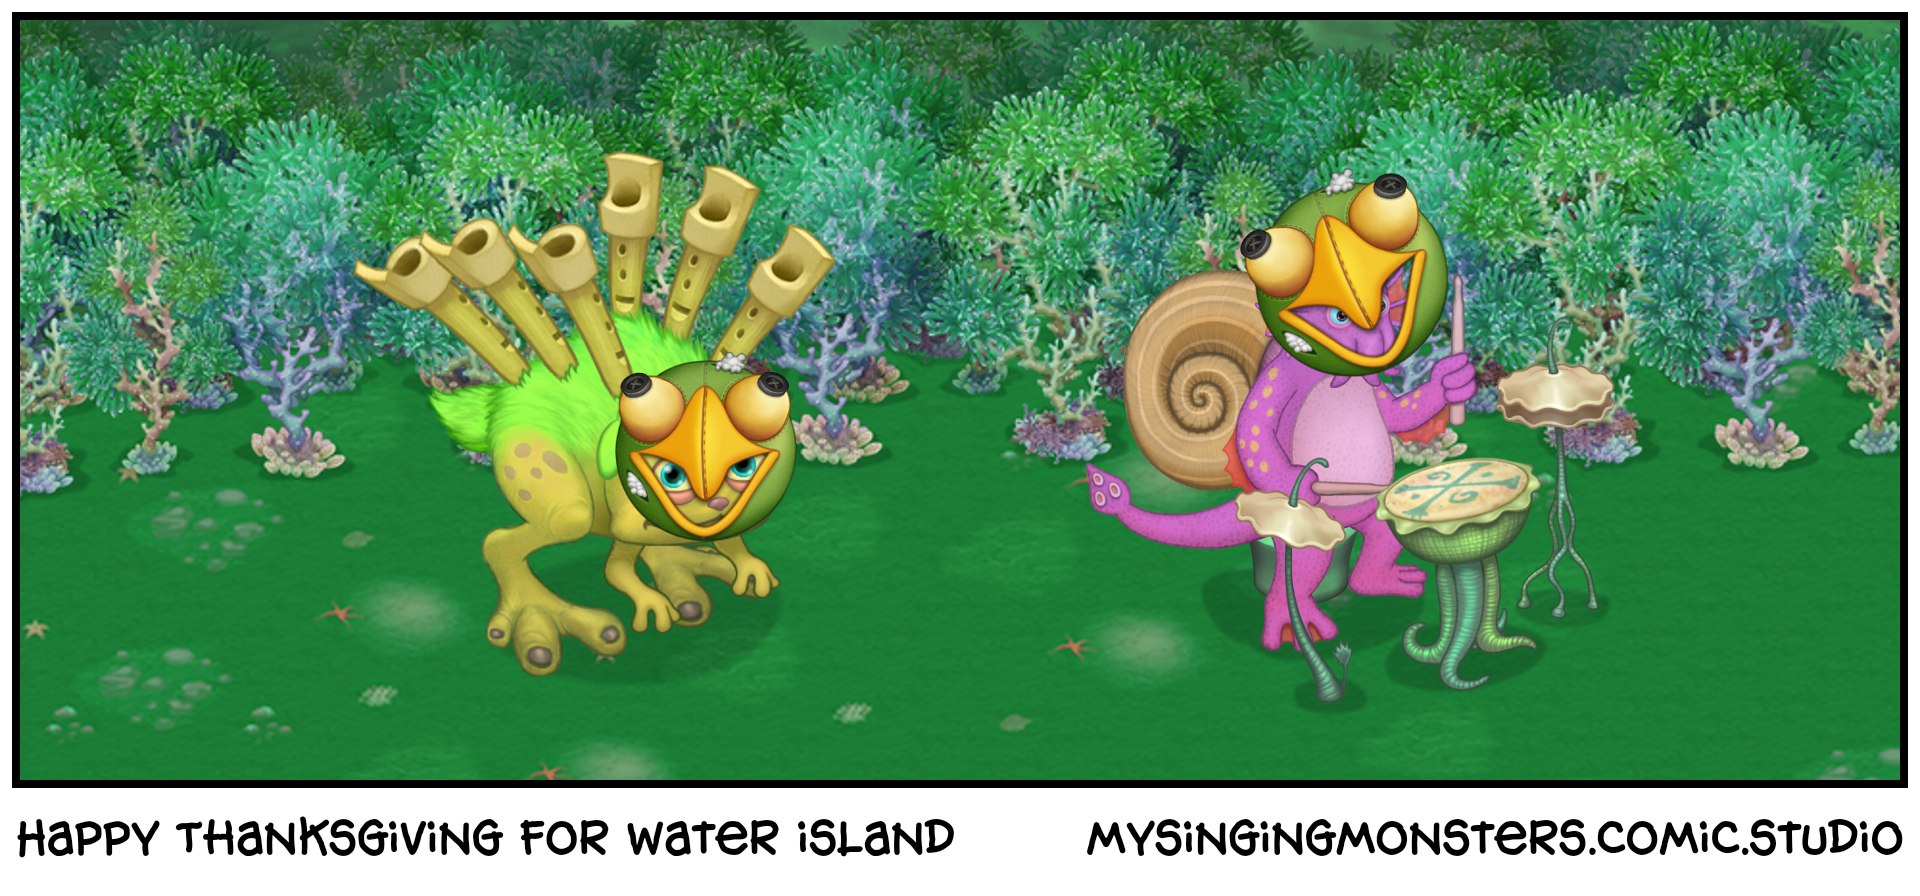 Happy Thanksgiving for water island